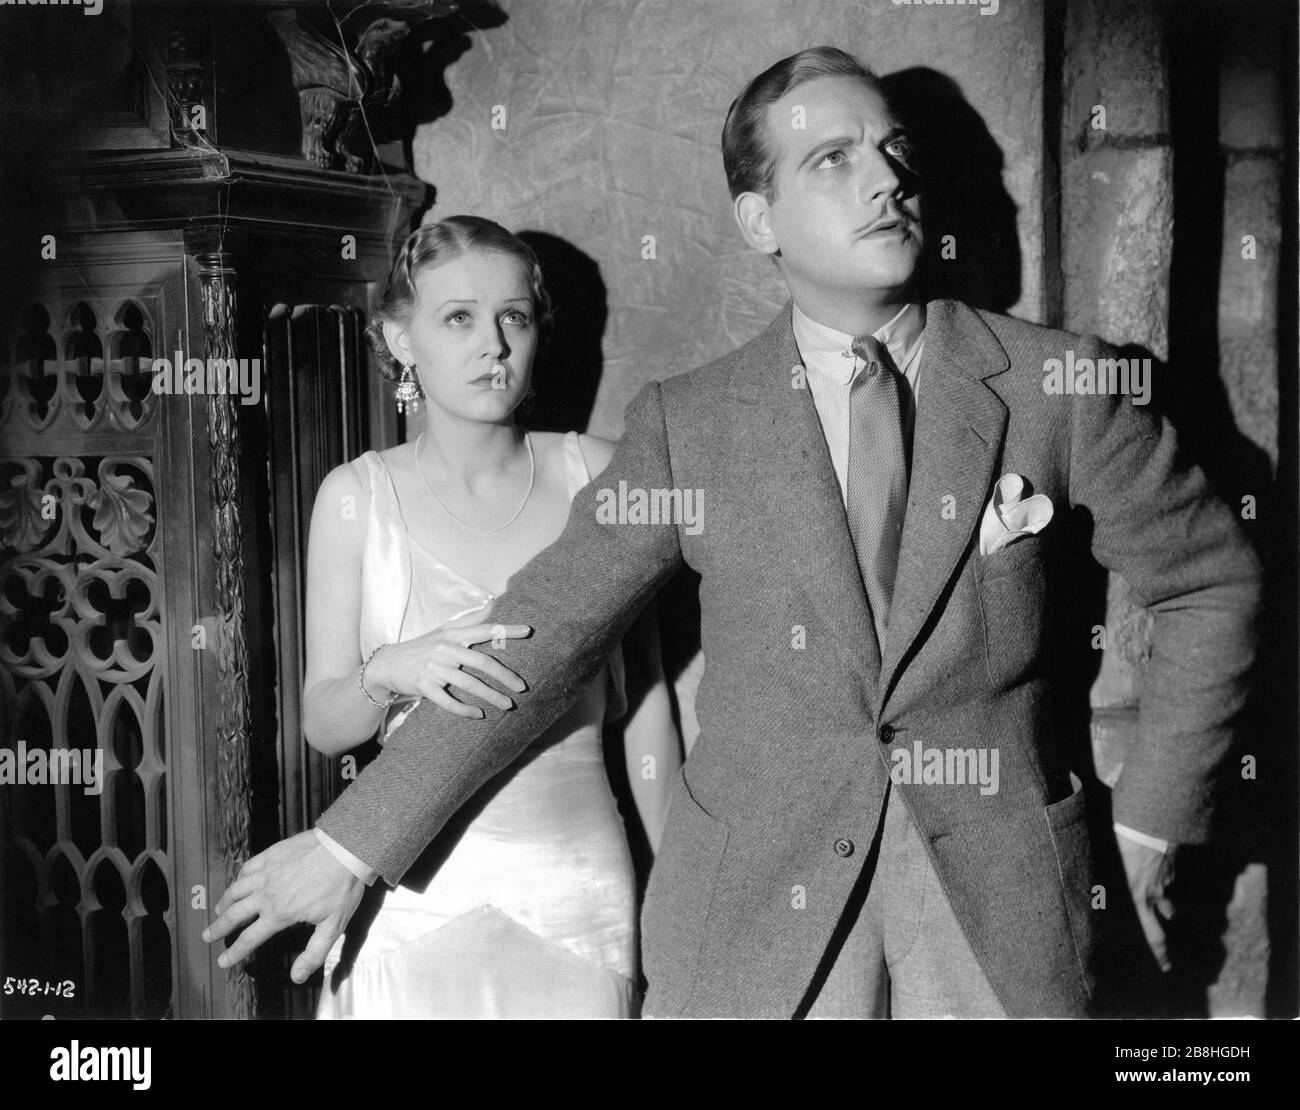 GLORIA STUART and MELVYN DOUGLAS in THE OLD DARK HOUSE 1932 director JAMES WHALE novel J. B. Priestley screenplay Benn W. Levy Universal Pictures Stock Photo